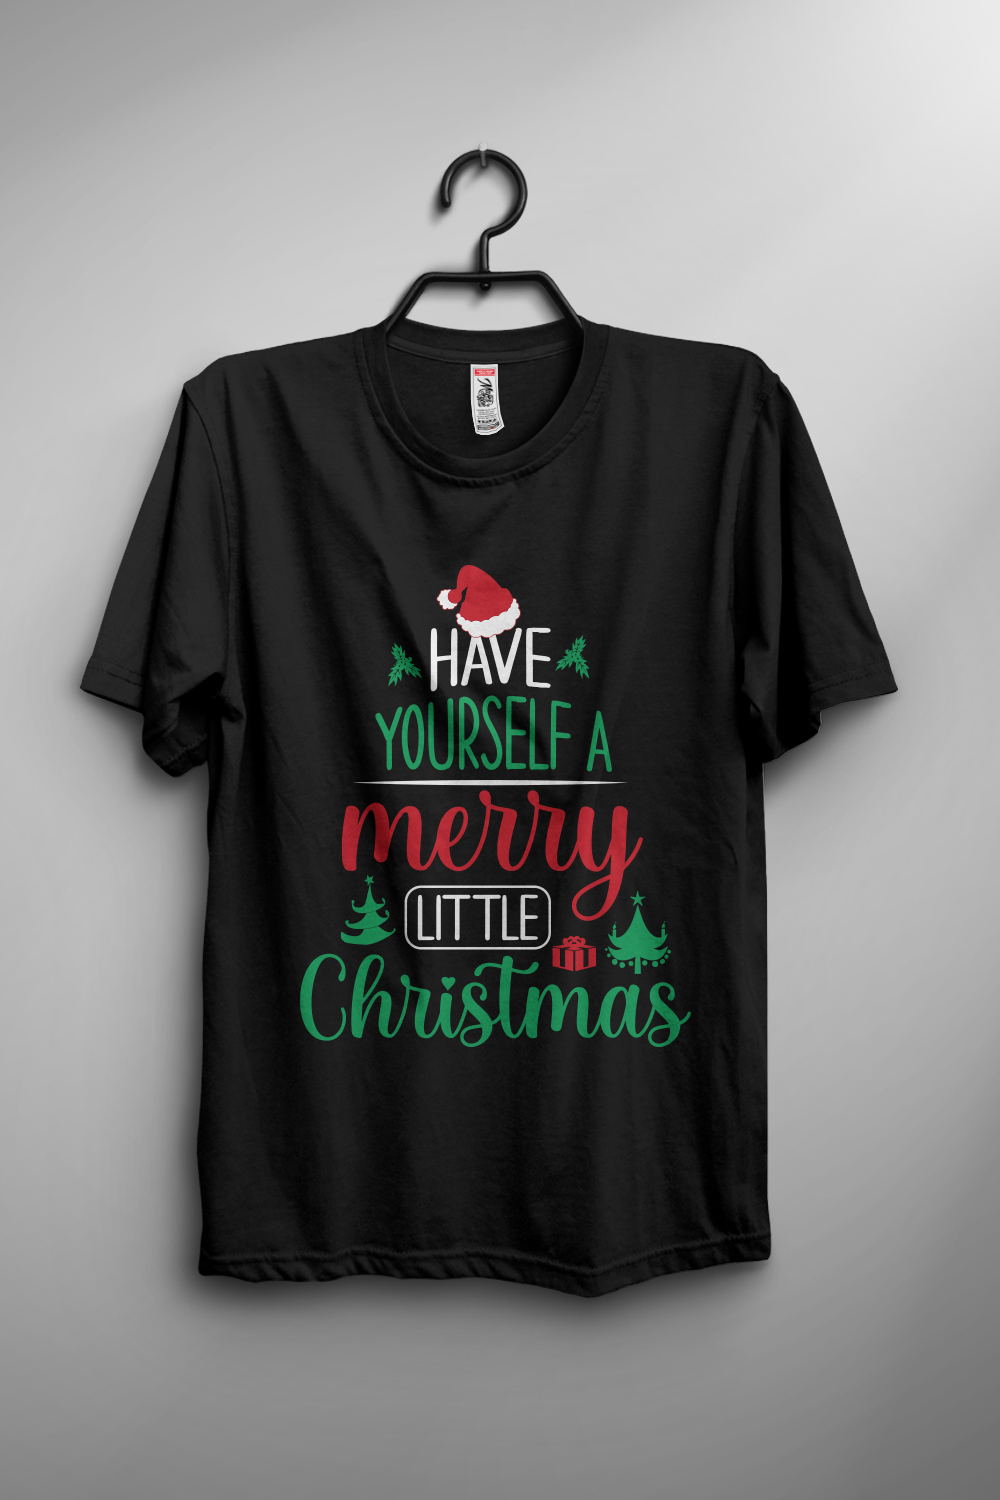 have yourself a merry little Christmas T-shirt design pinterest preview image.